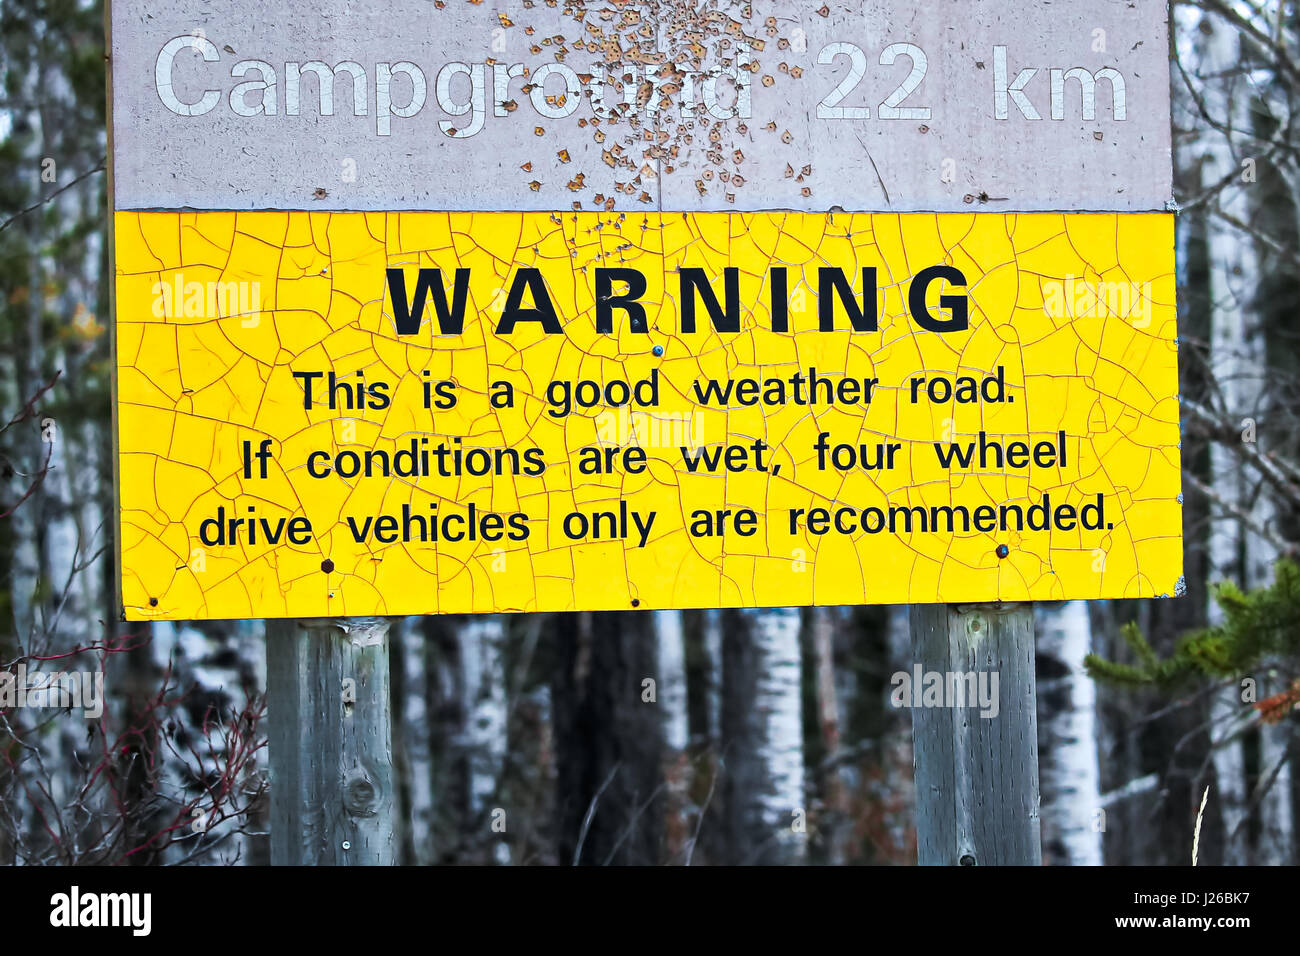 Warning about a rough road to campsite. Stock Photo